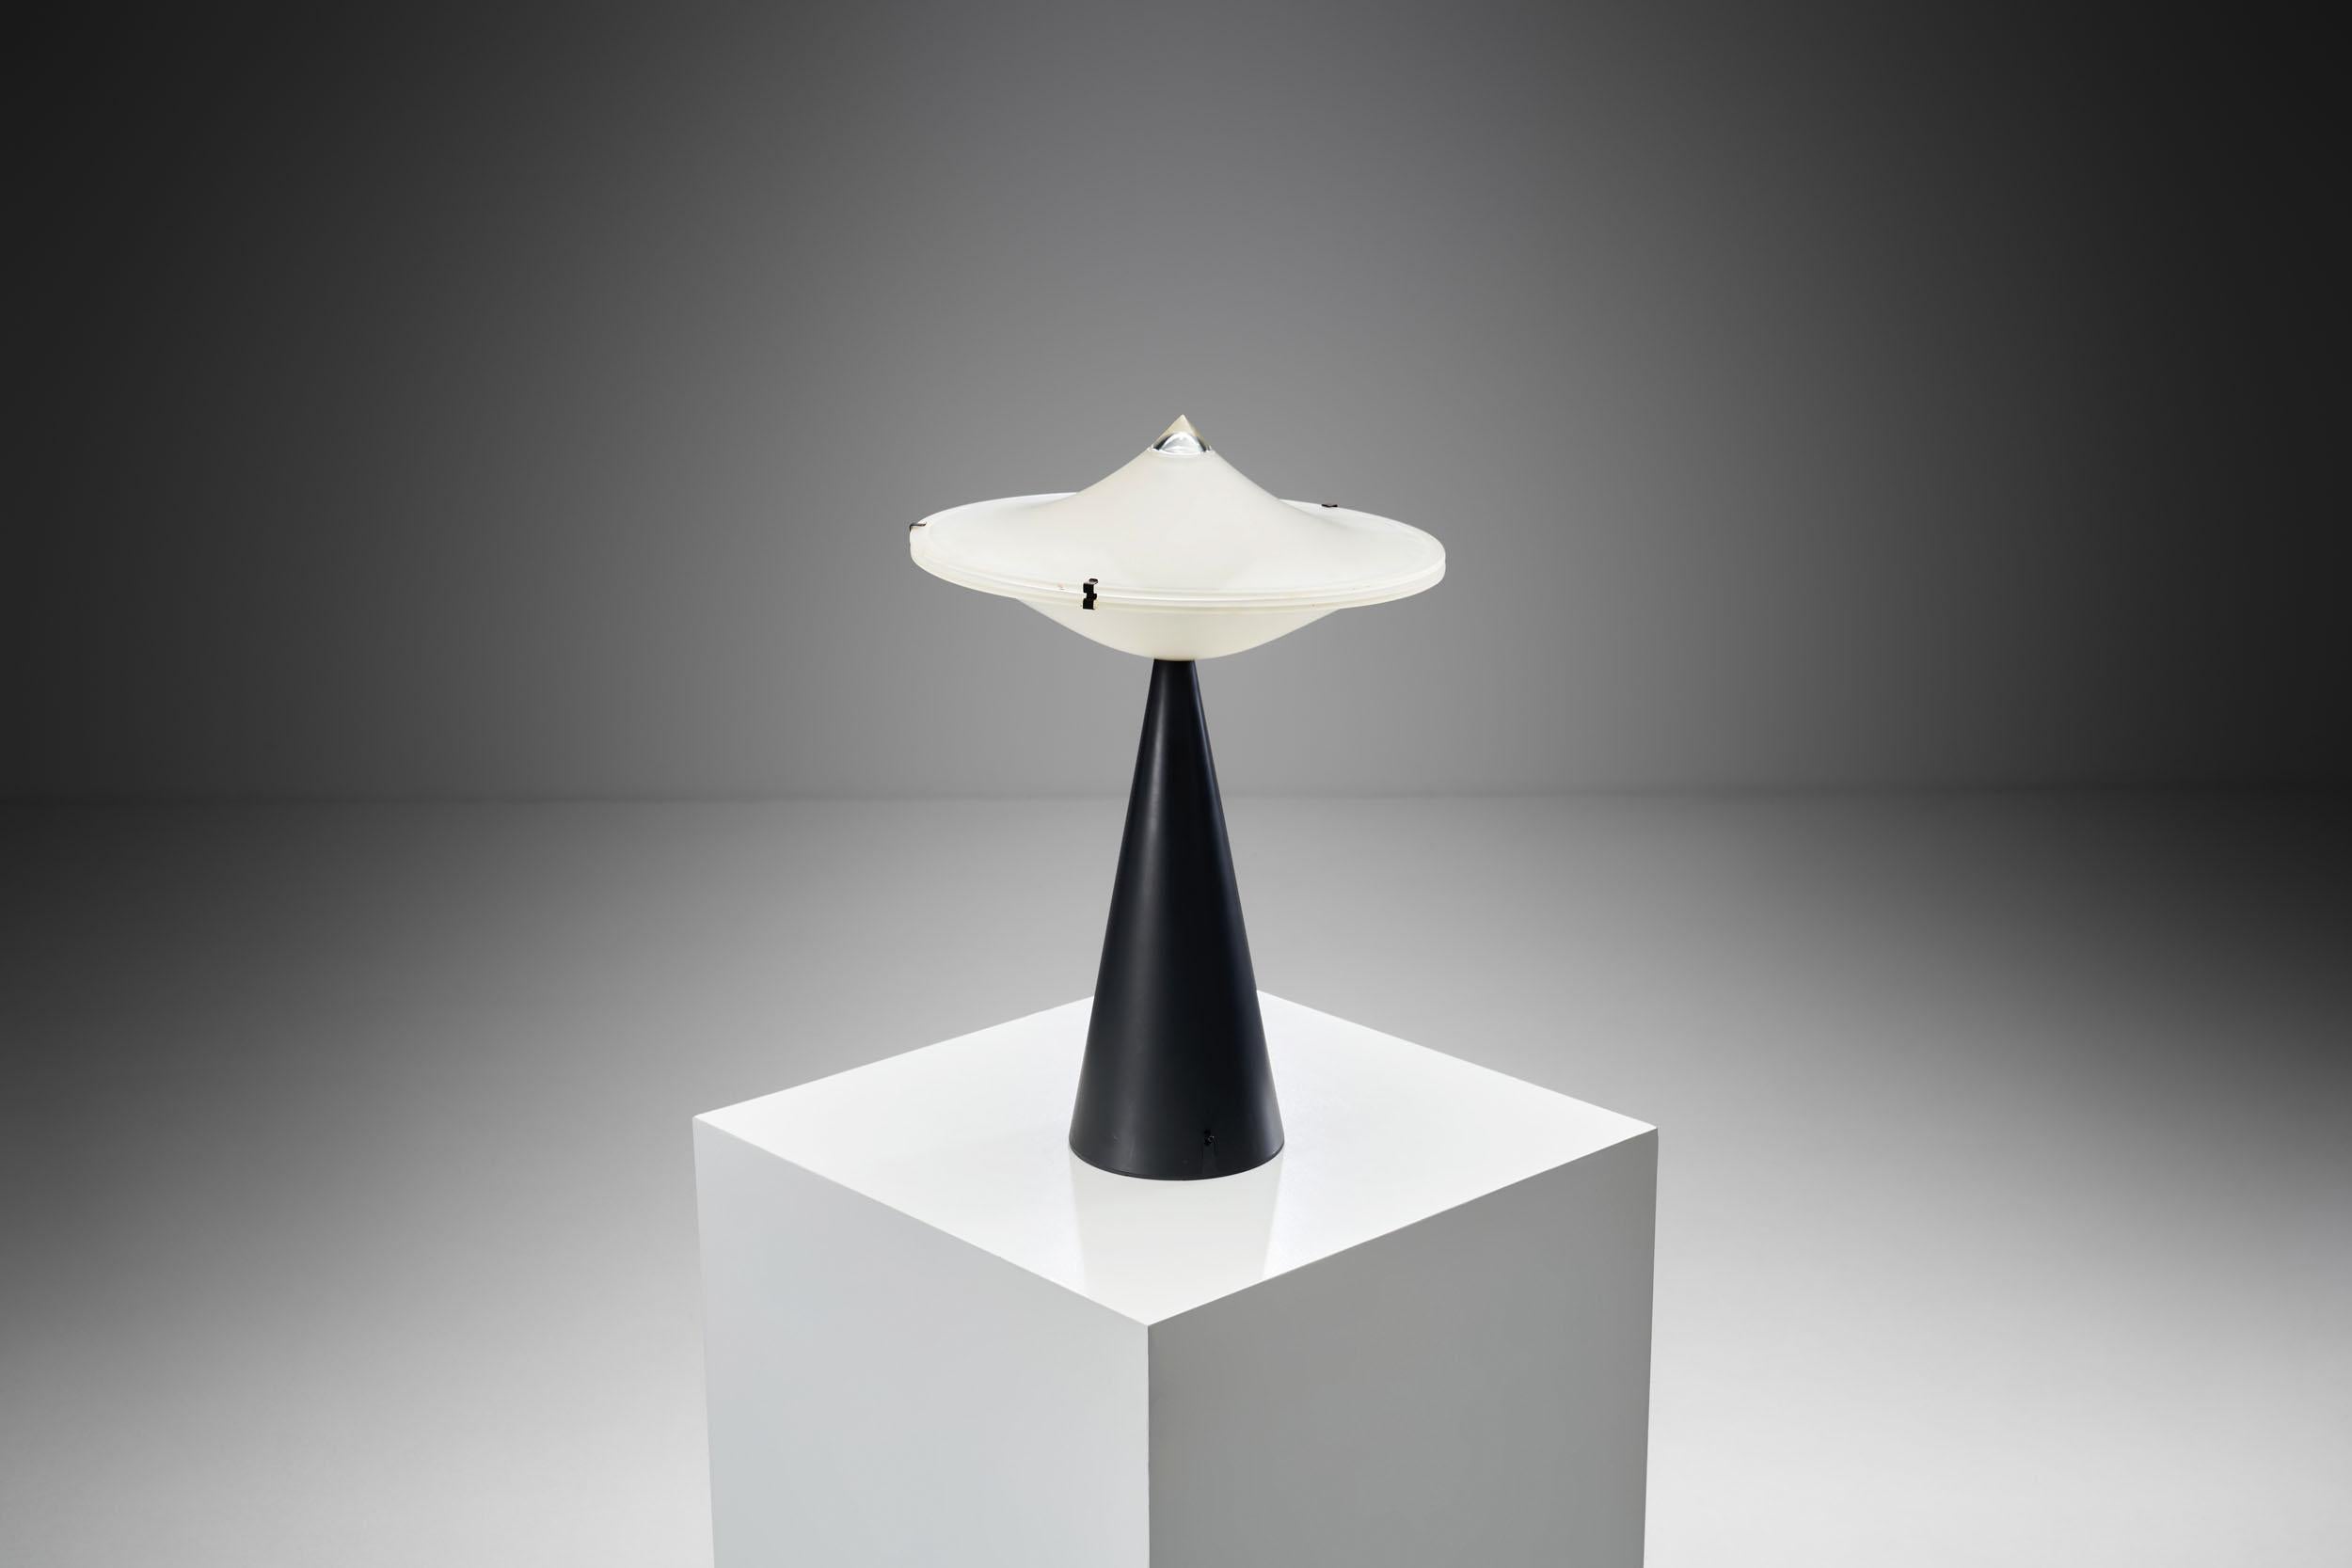 Late 20th Century “Alien” Table Lamp by Luciano Cesaro for Tre Ci Luce, Italy 1970s